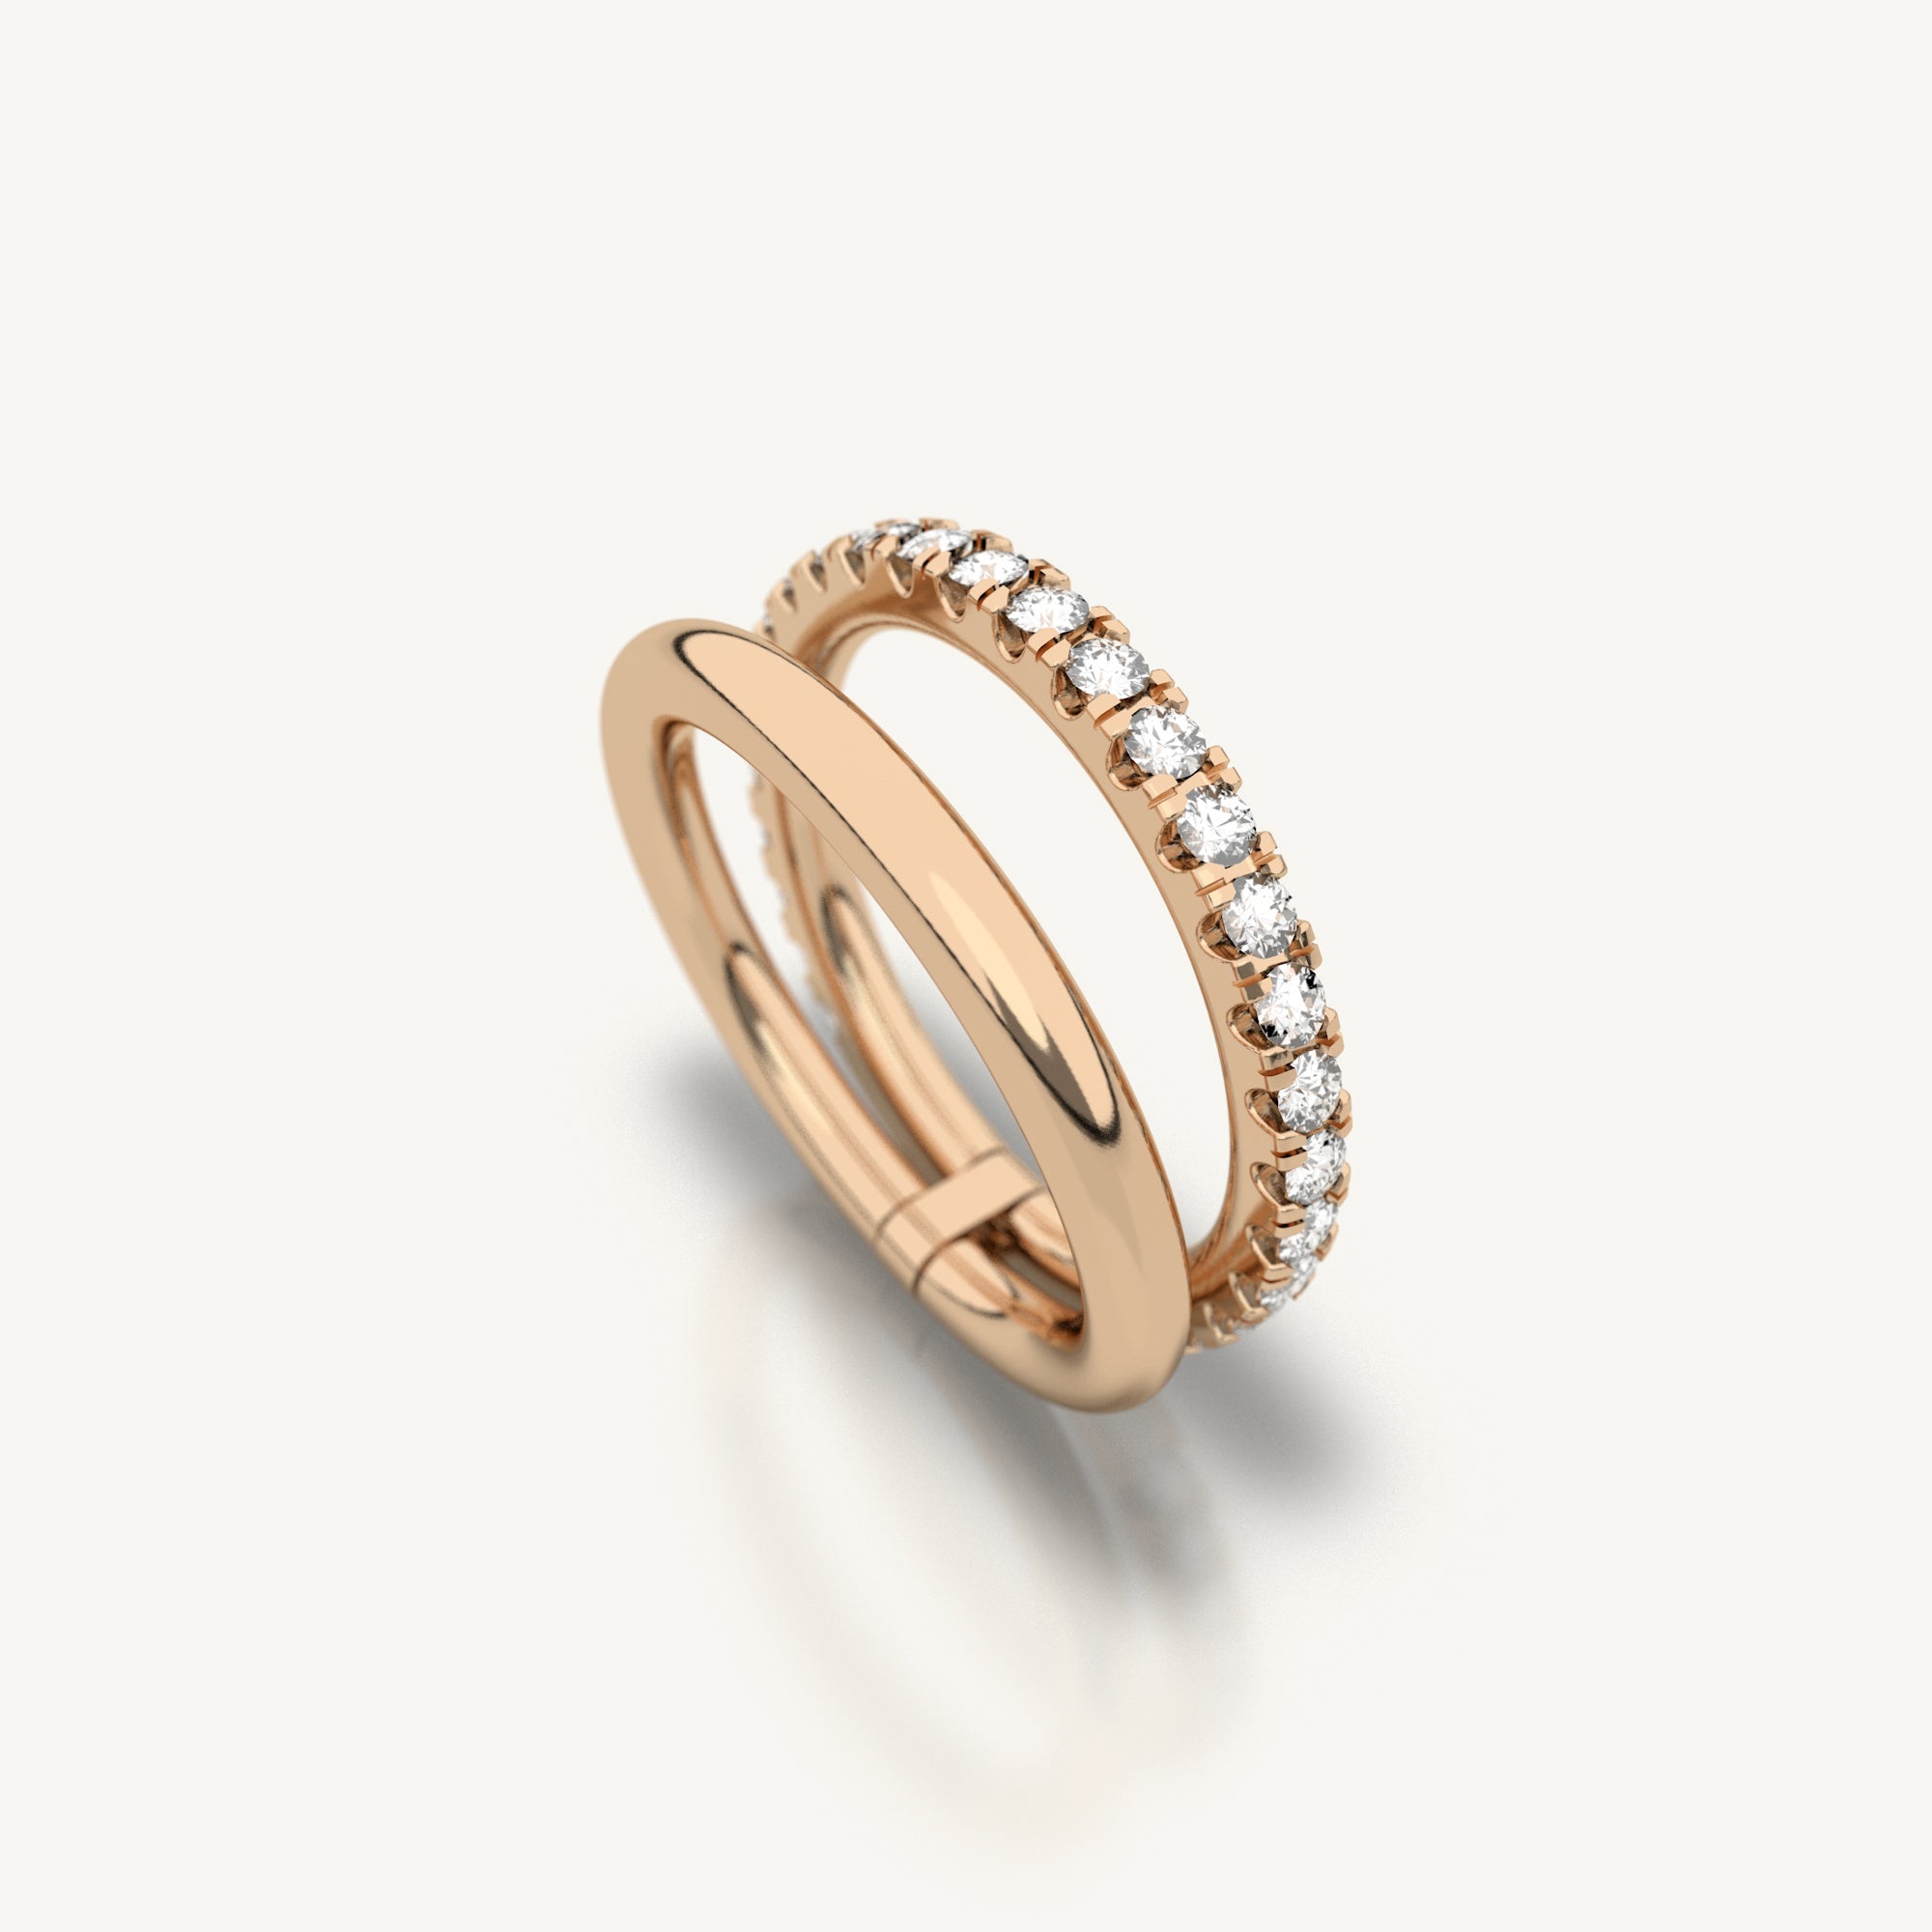 Duo ring from inacio made from 18k recycled rose gold and lab grown diamonds